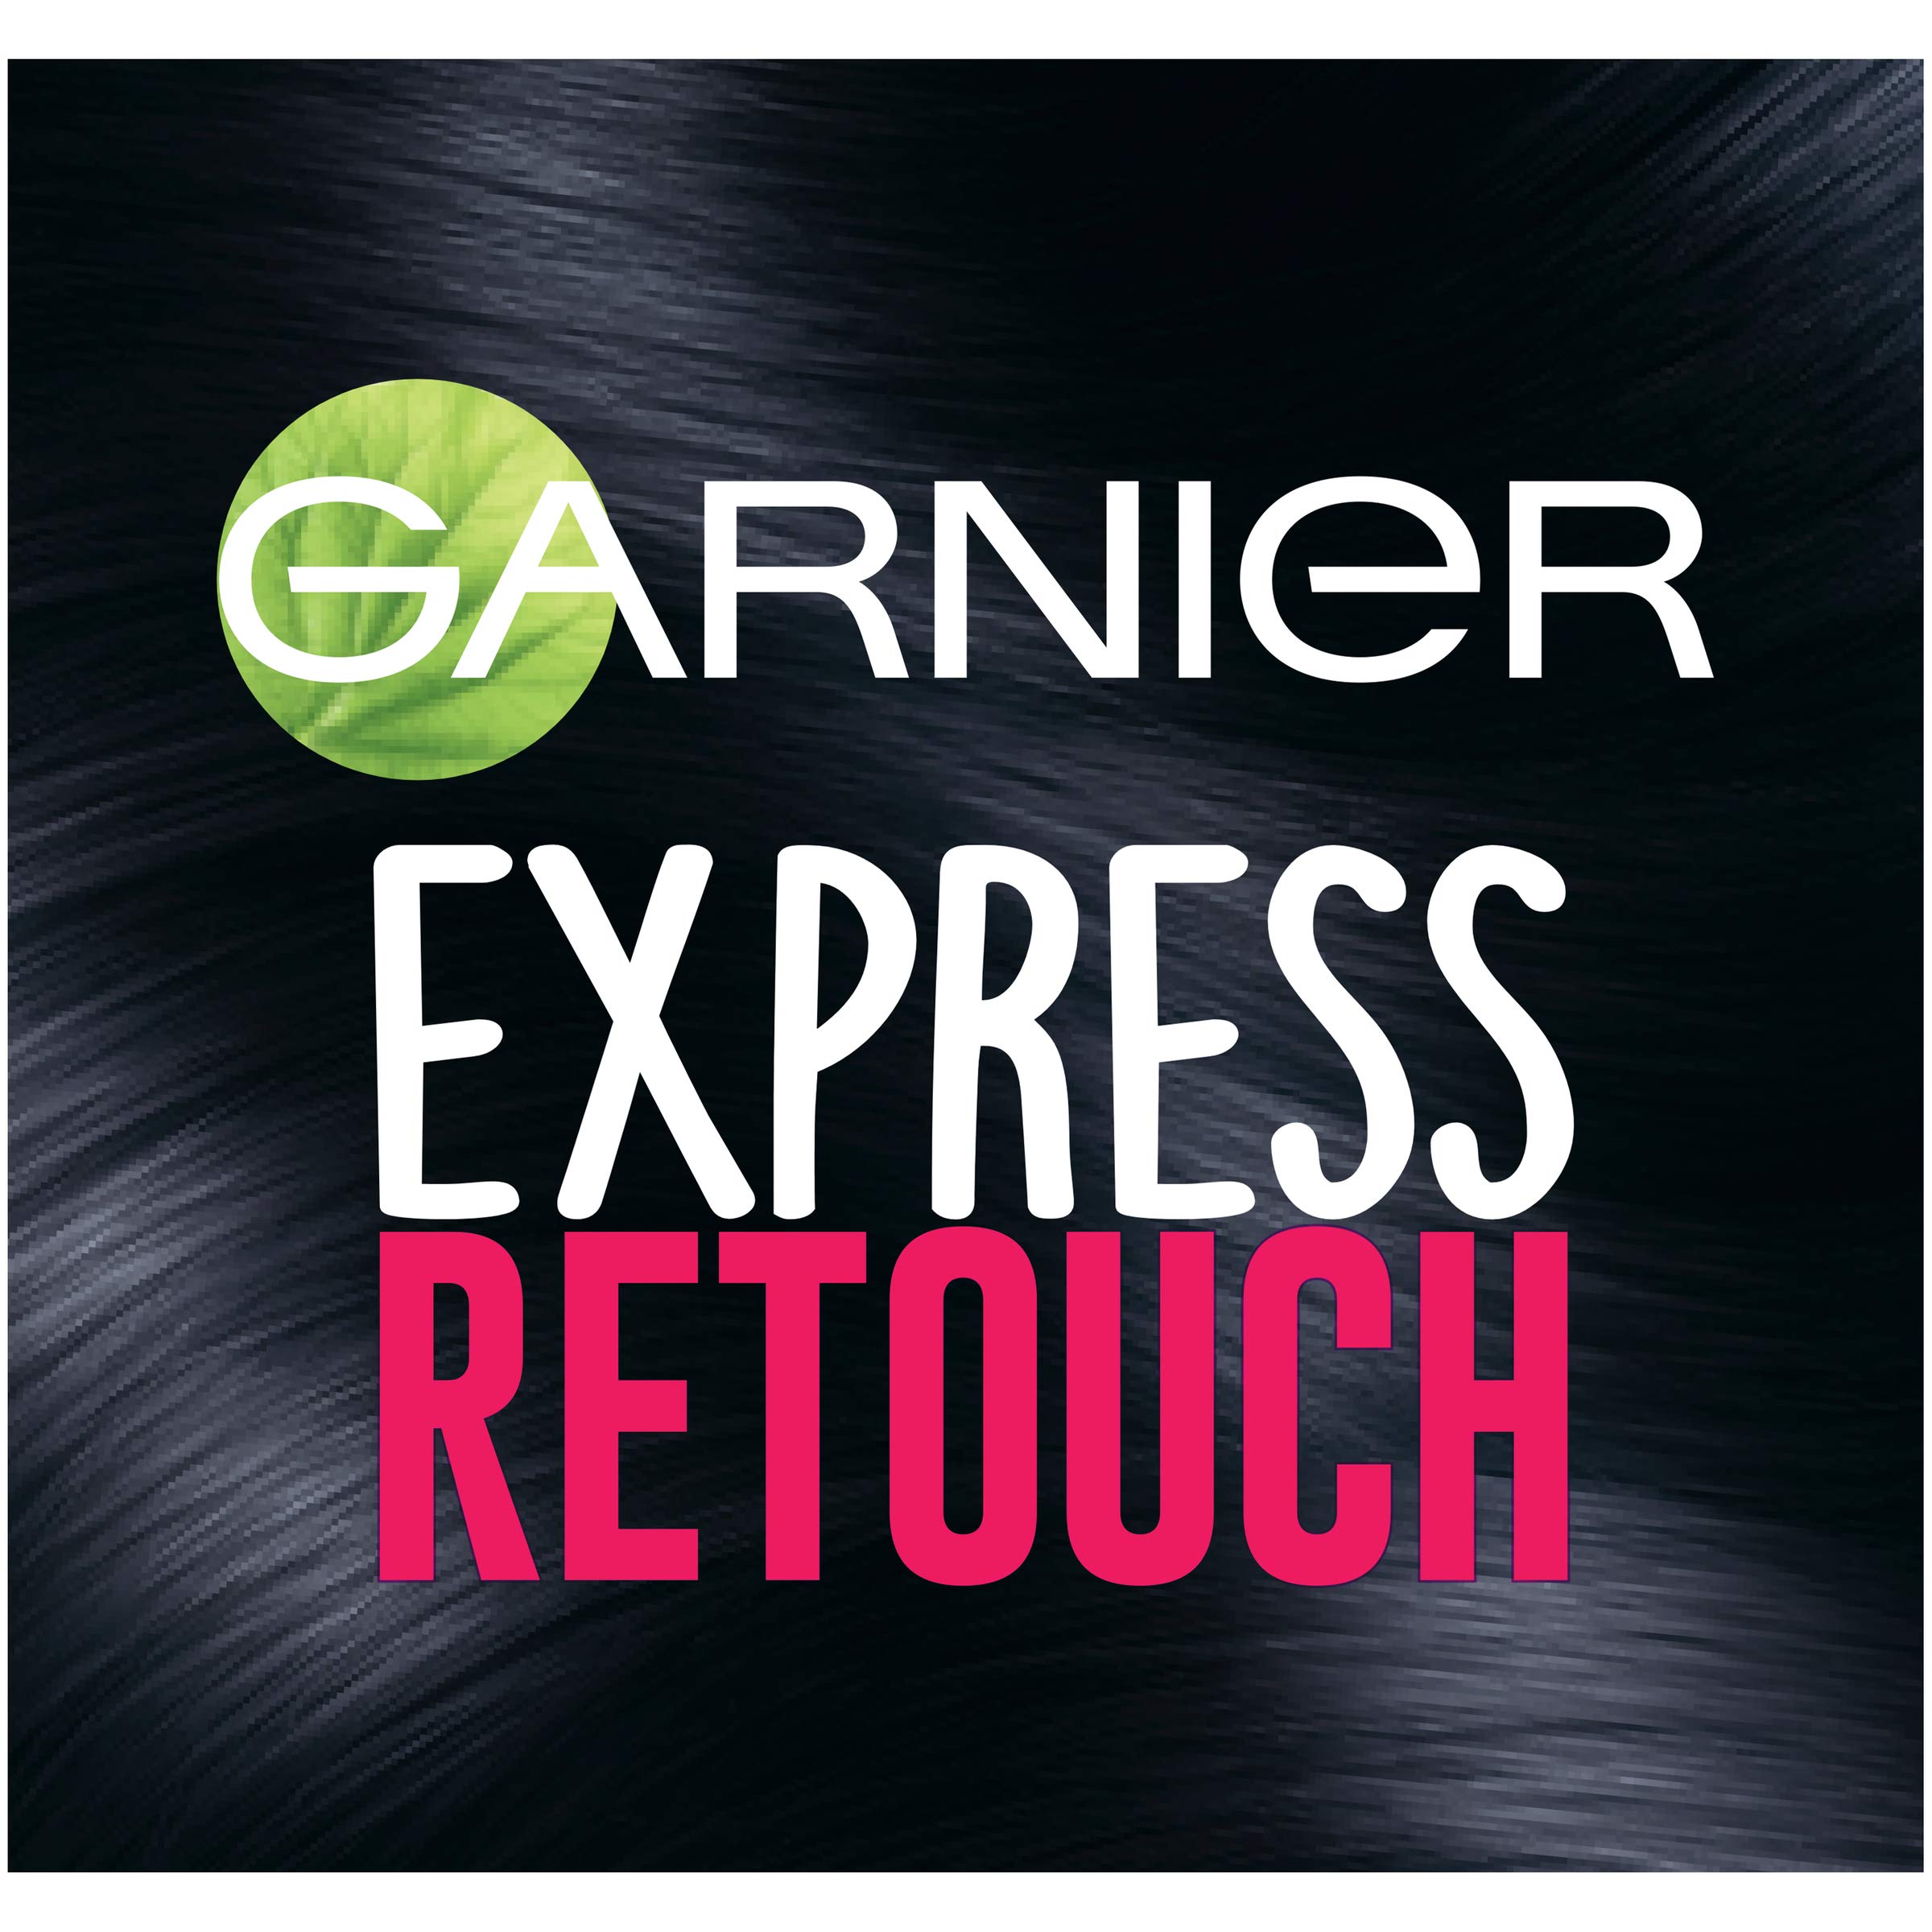 Garnier Hair Color Express Retouch Gray Hair Concealer, Instant Gray Coverage, Black, 1 Count